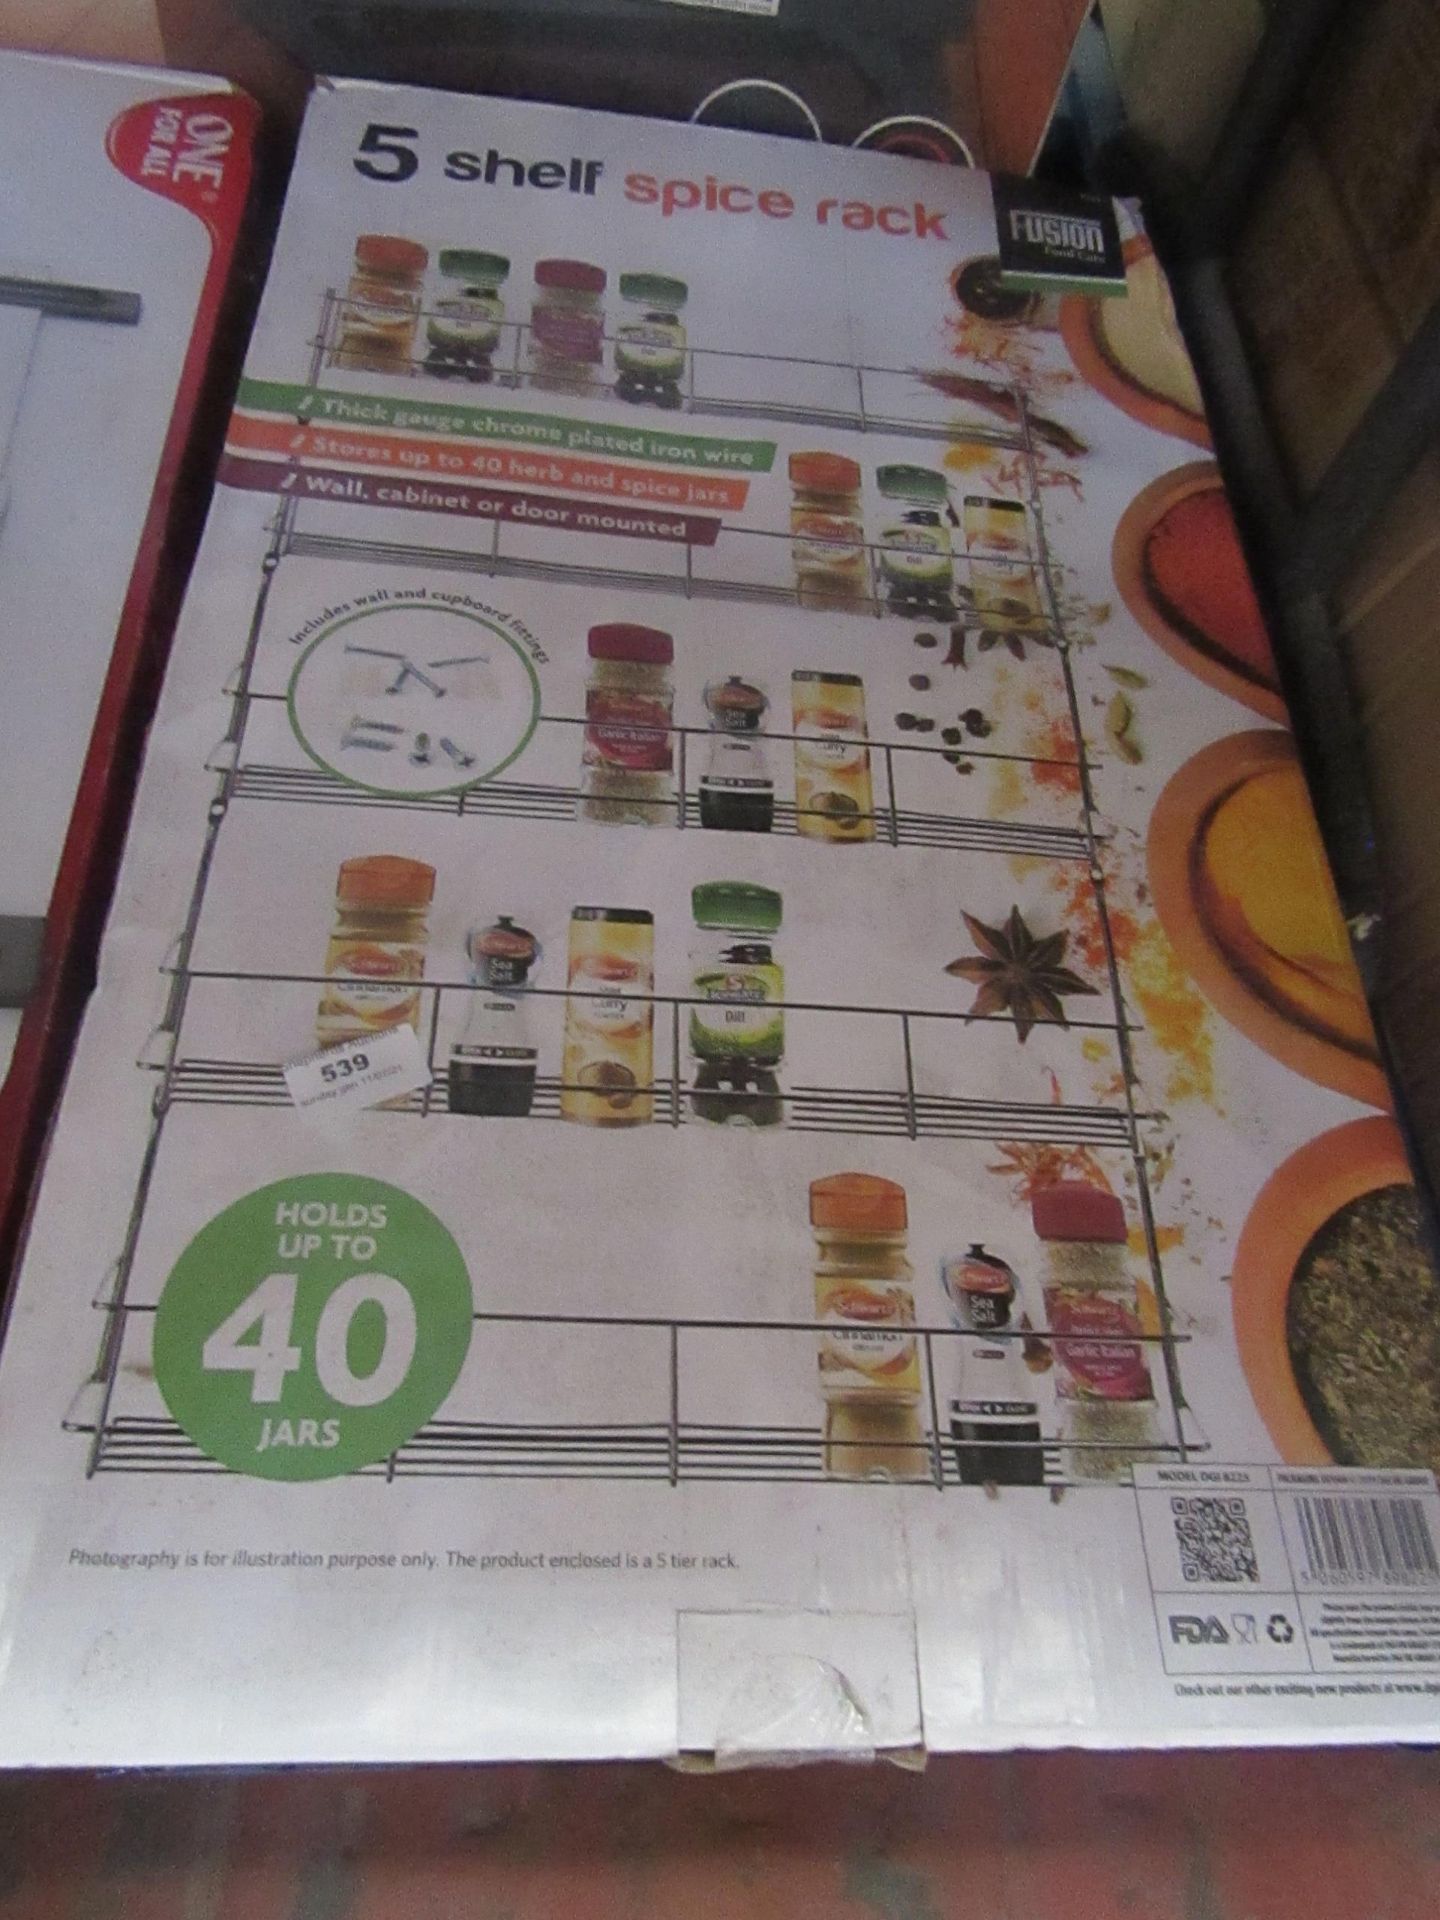 1x fusion 5 shelf spice rack, holds upto 40 jars, unchecked & boxed